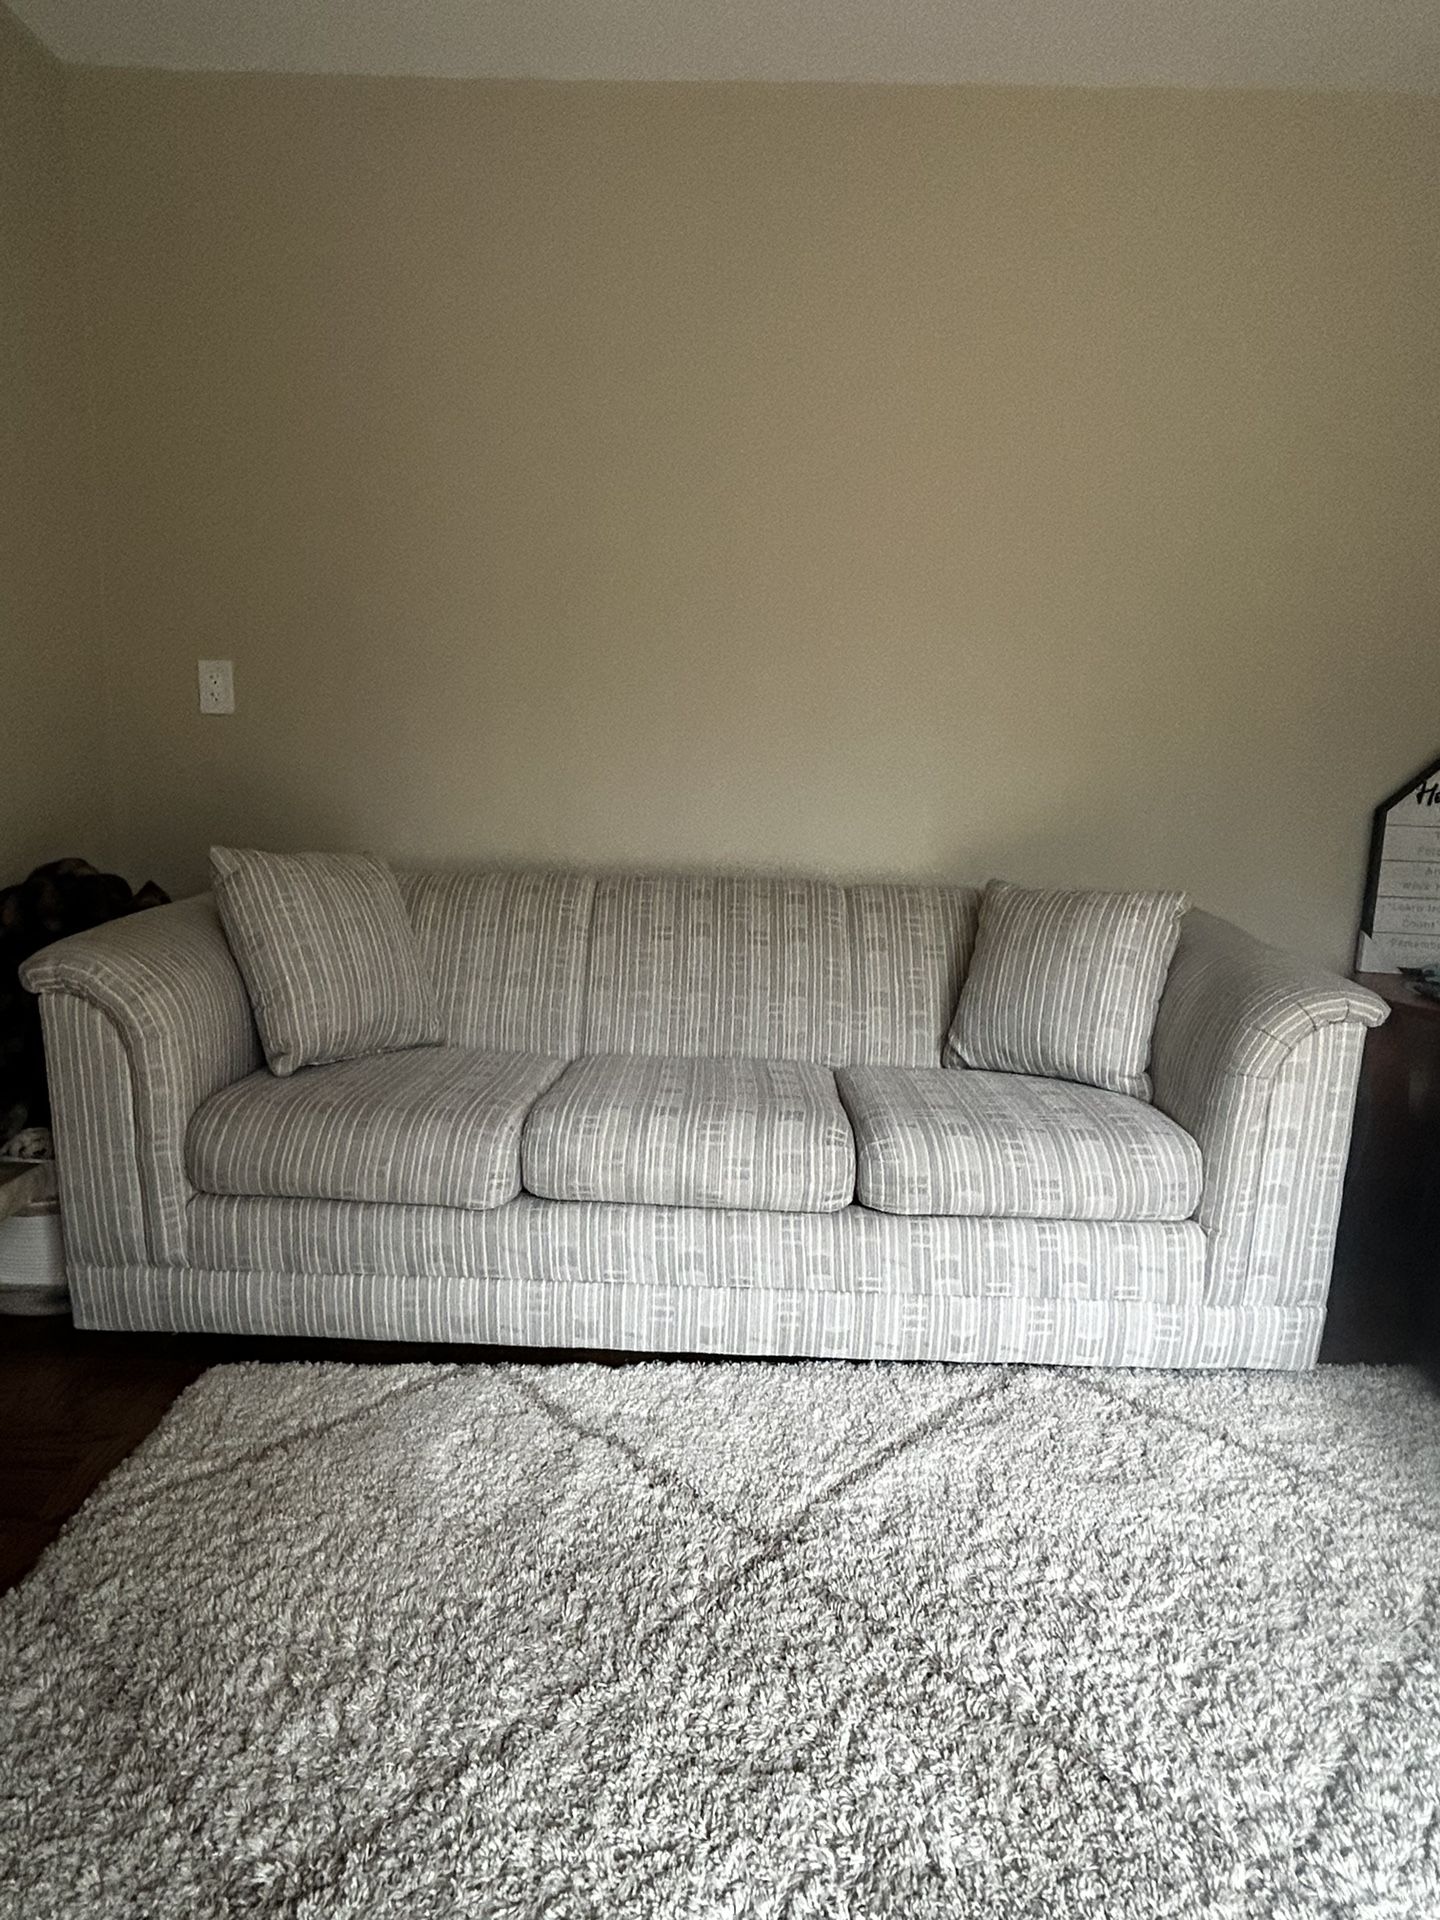 Upholstered Couch